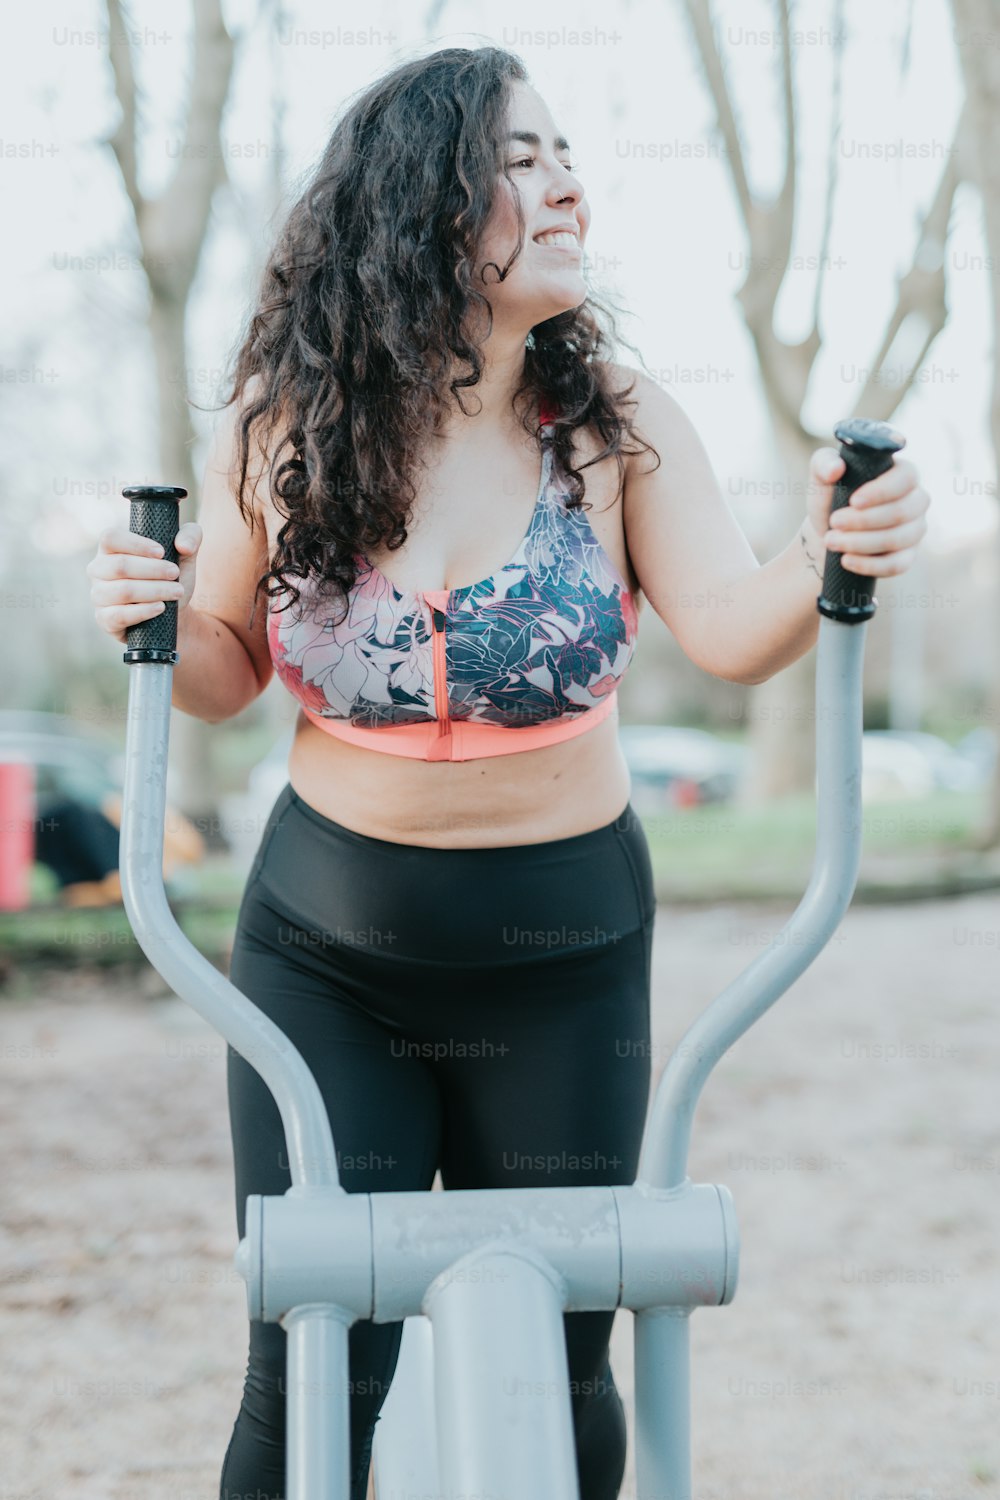 a woman on a stationary exercise bike in a park